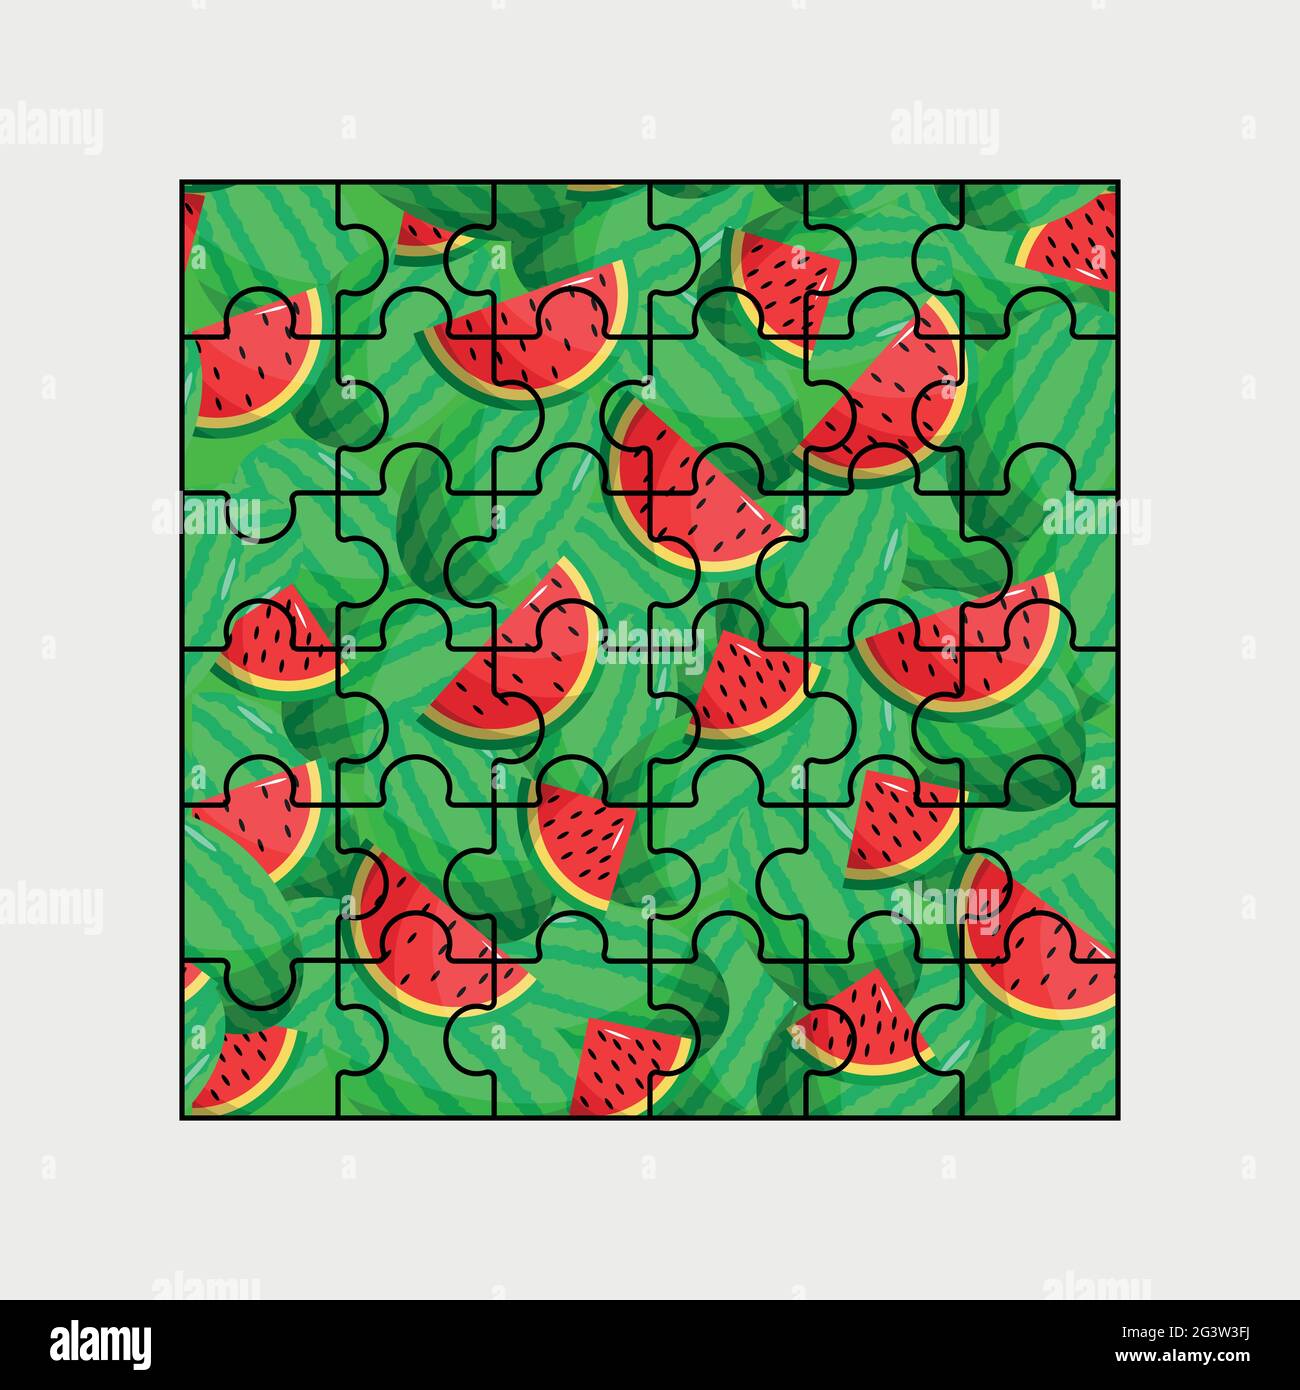 Puzzle grid template. 36 piece puzzle, puzzle game and puzzle 6x6 pieces of frame design with watermelon paterna background. Stock Vector